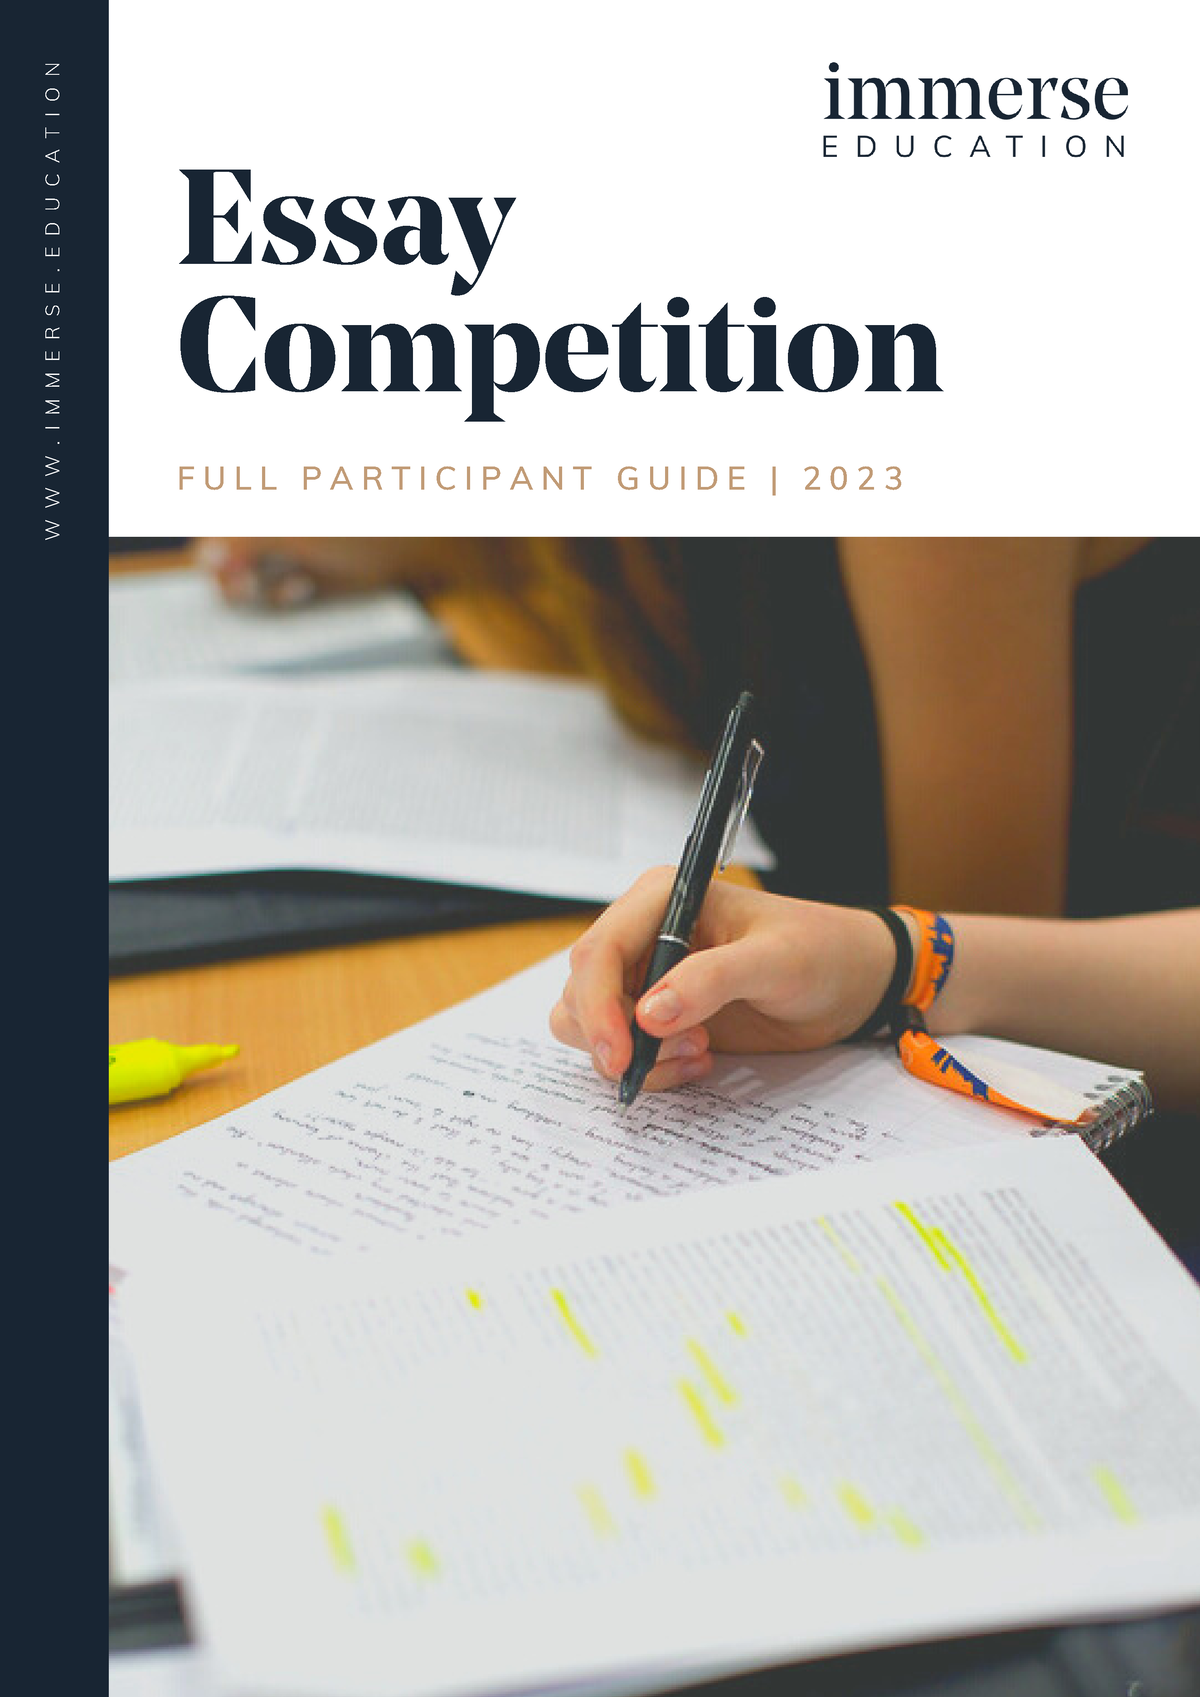 immerse education essay competition questions 2023